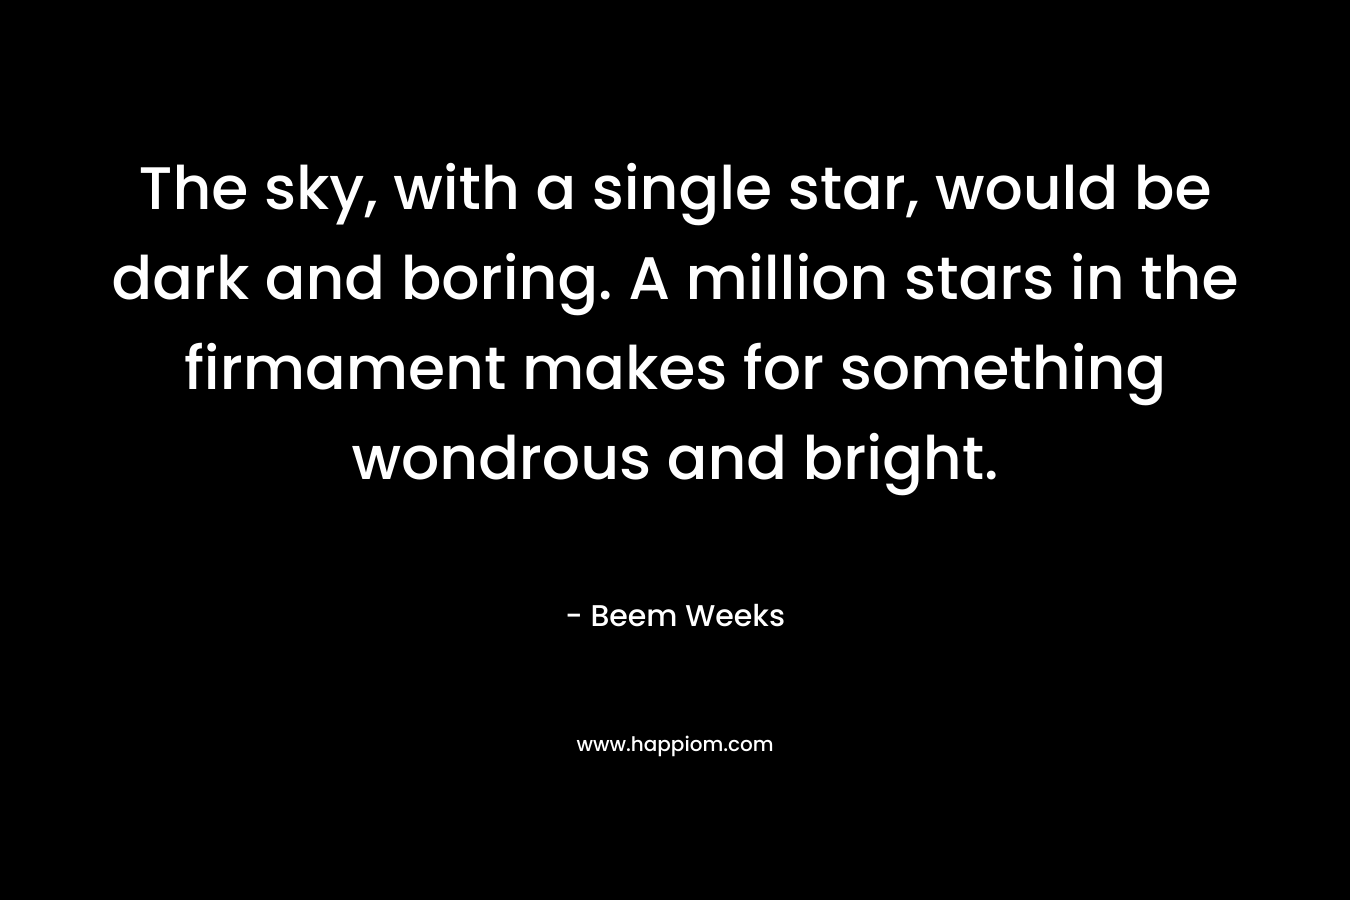 The sky, with a single star, would be dark and boring. A million stars in the firmament makes for something wondrous and bright.